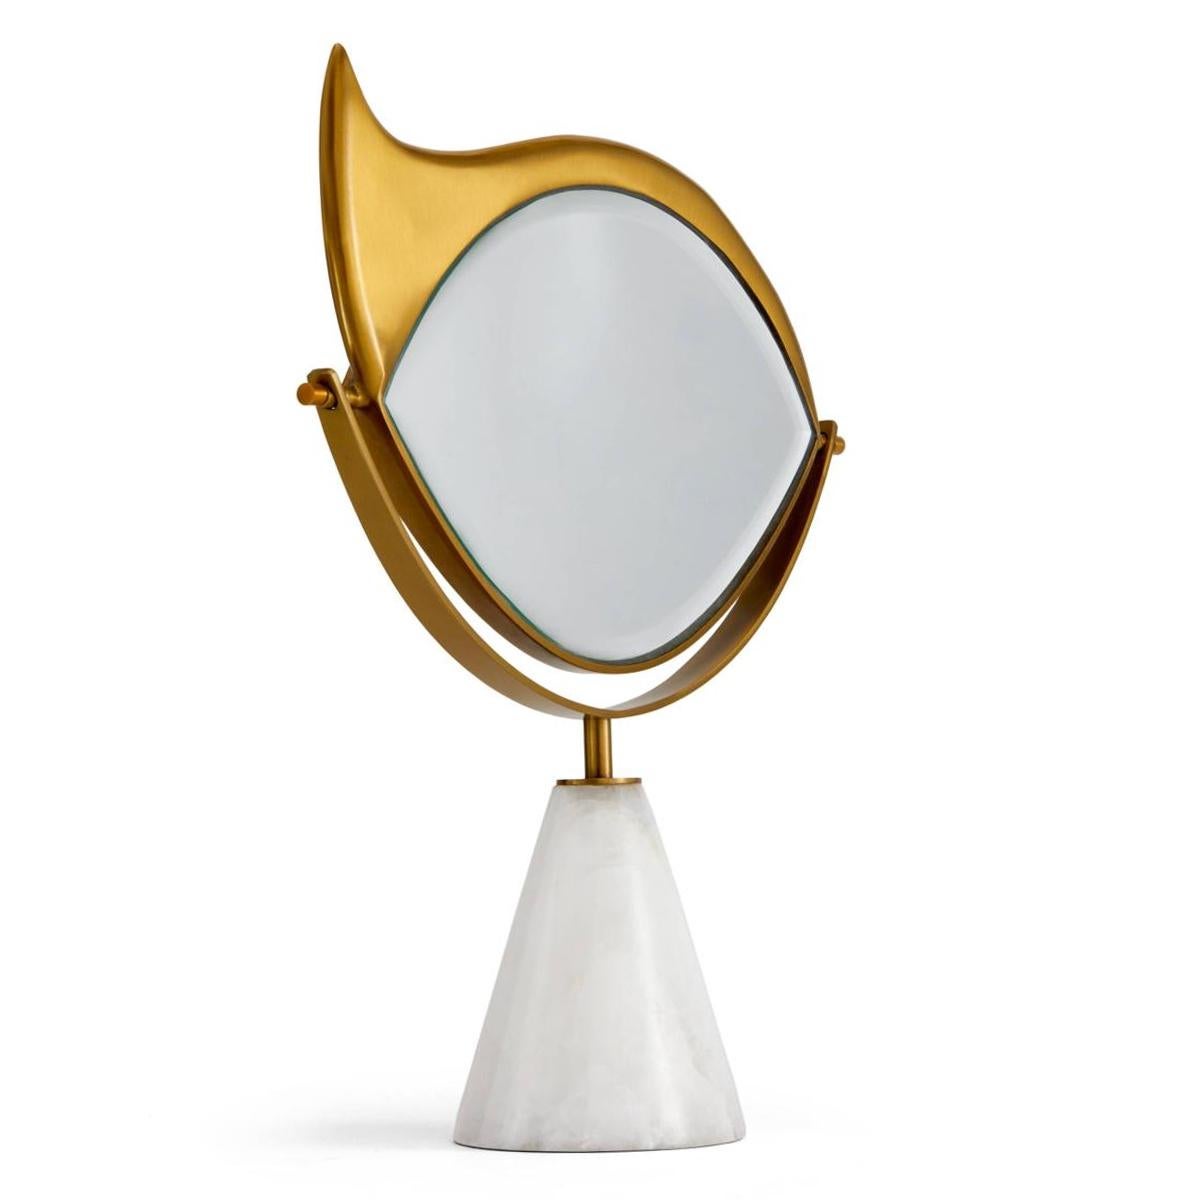 Mirror golden eye coiffeuse with solid brass structure
in 24-karat and white marble base. With reclining beveled
glass mirror.